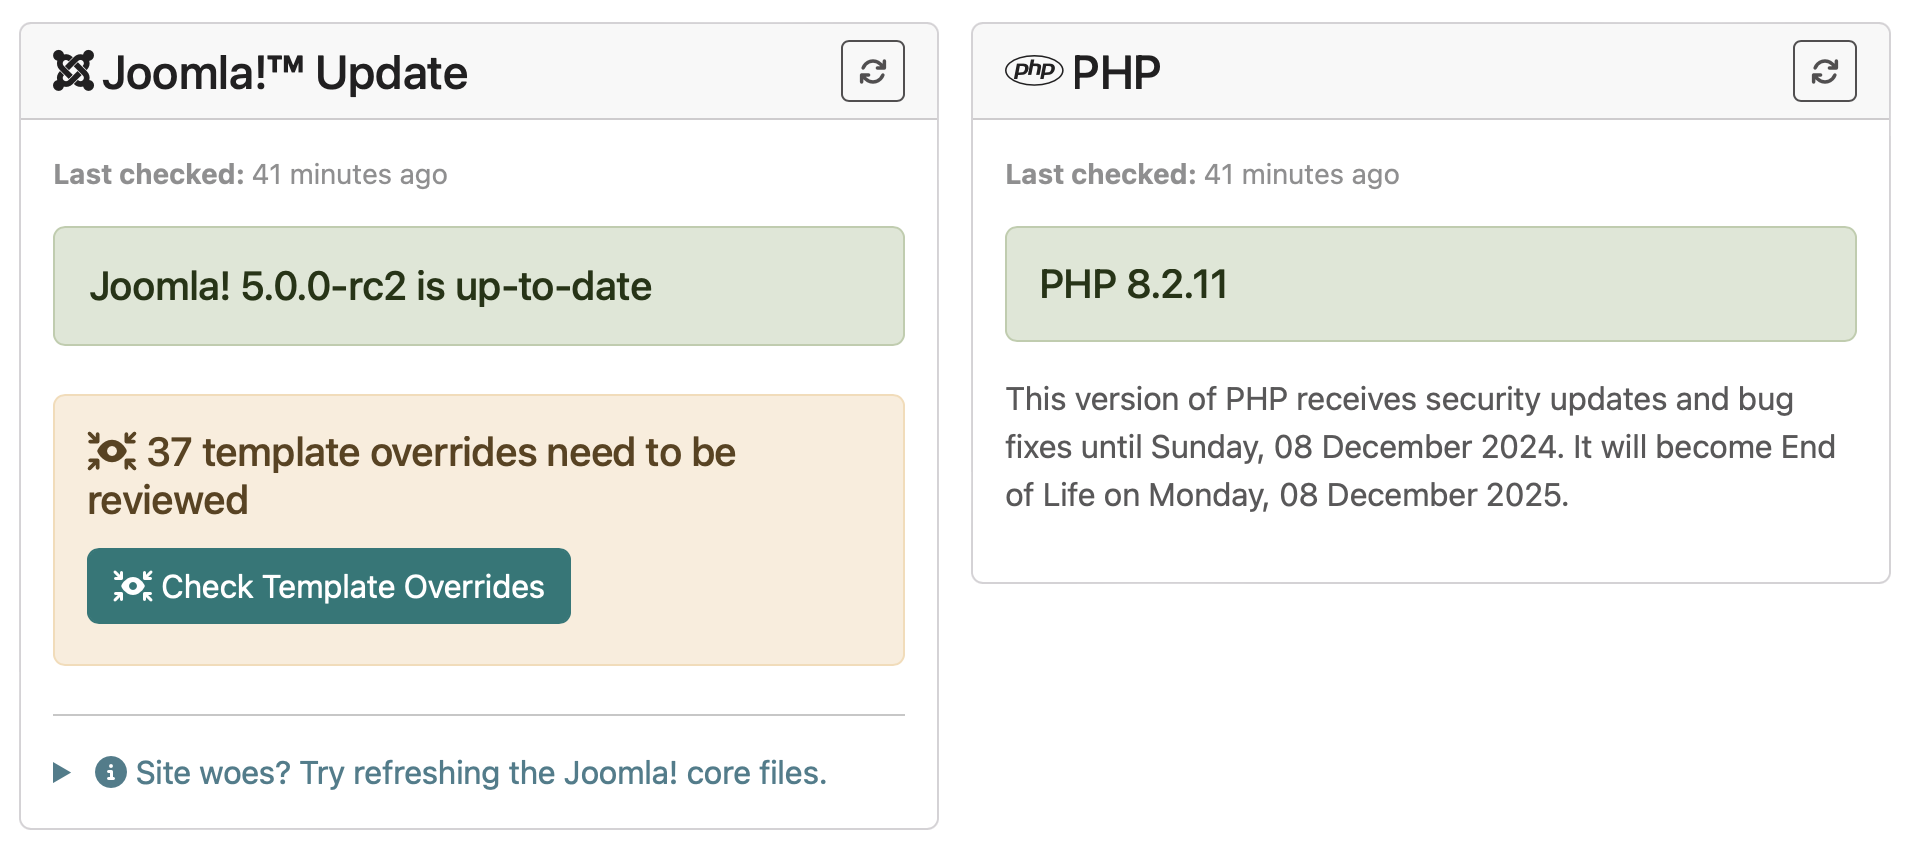 Joomla! and PHP version information